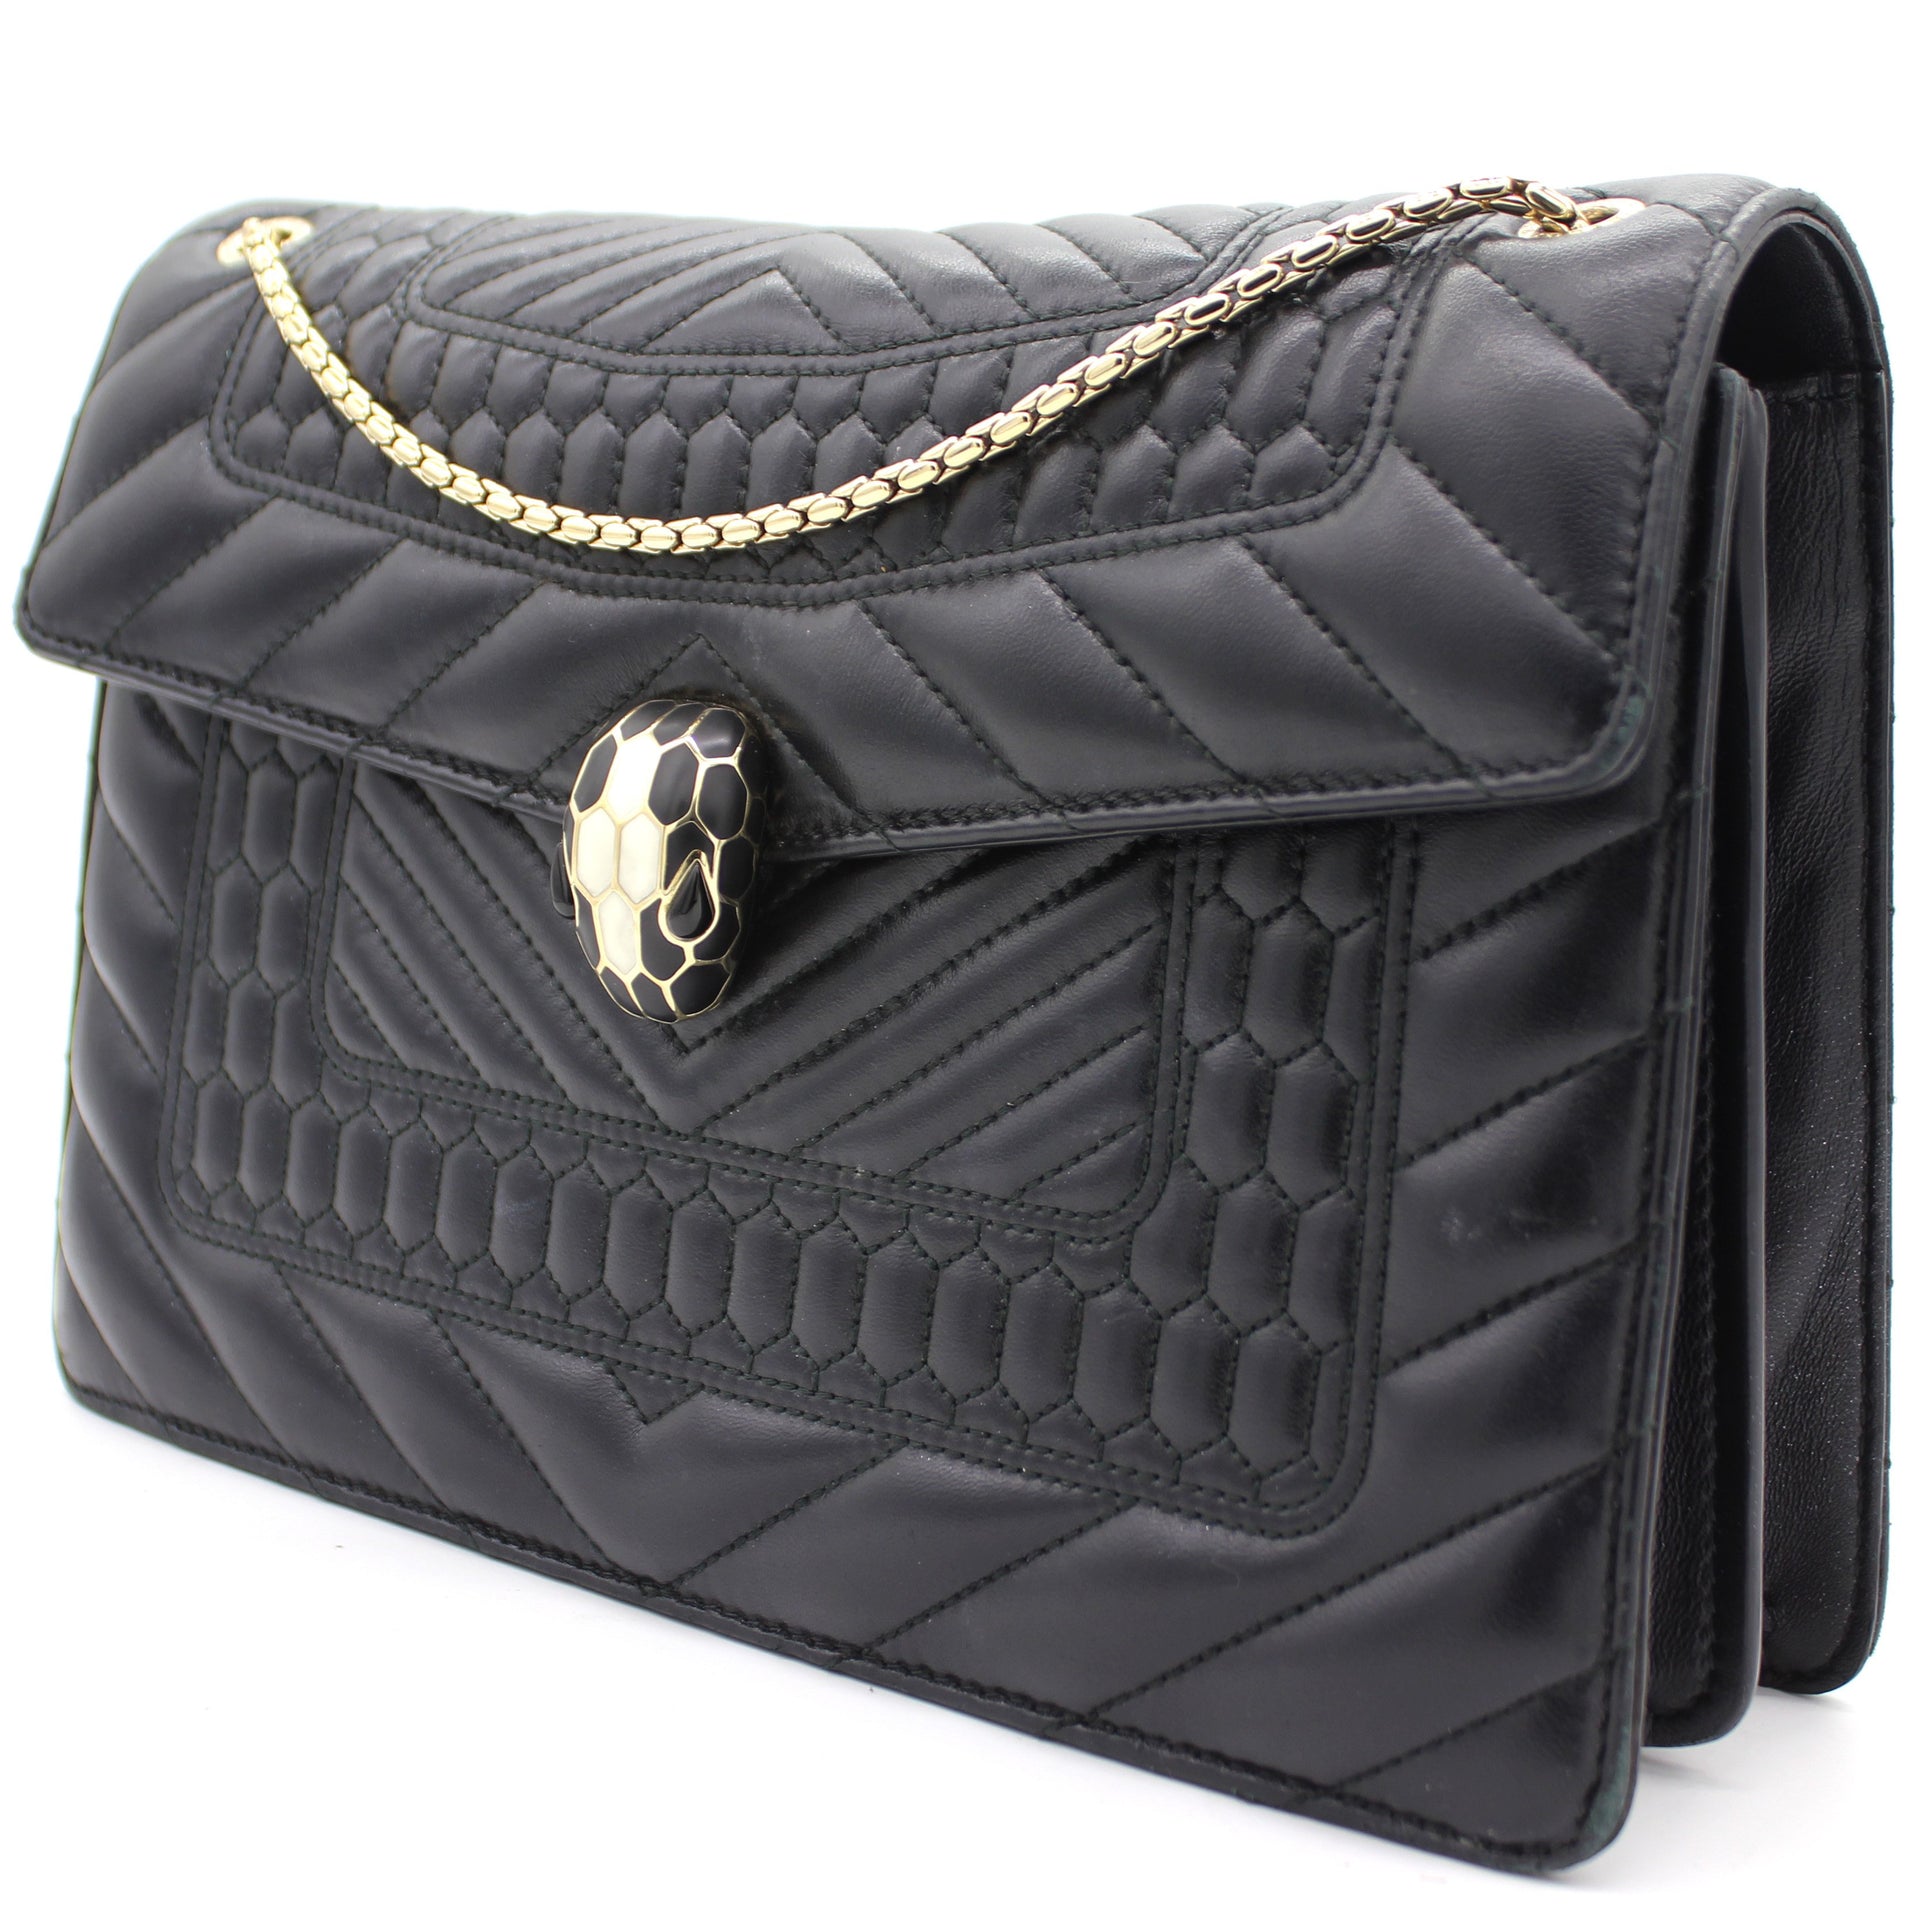 BVLGARI Serpenti Forever Quilted-leather Shoulder Bag in Black